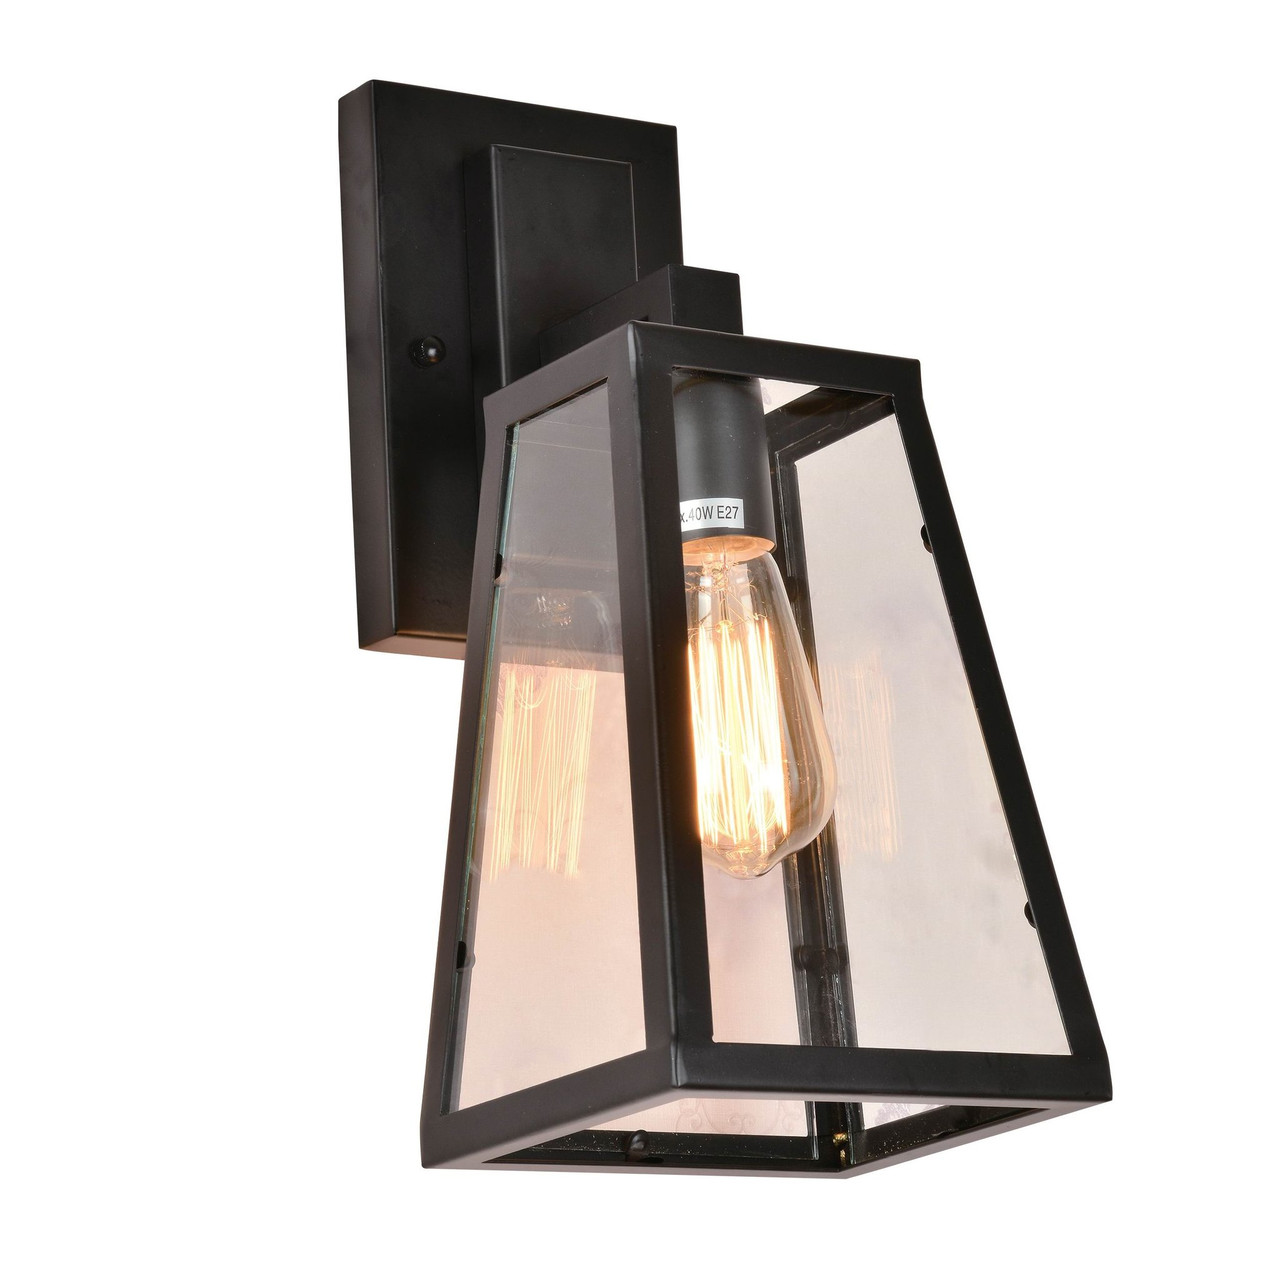 1-Light Wall Sconce By Young Lighting